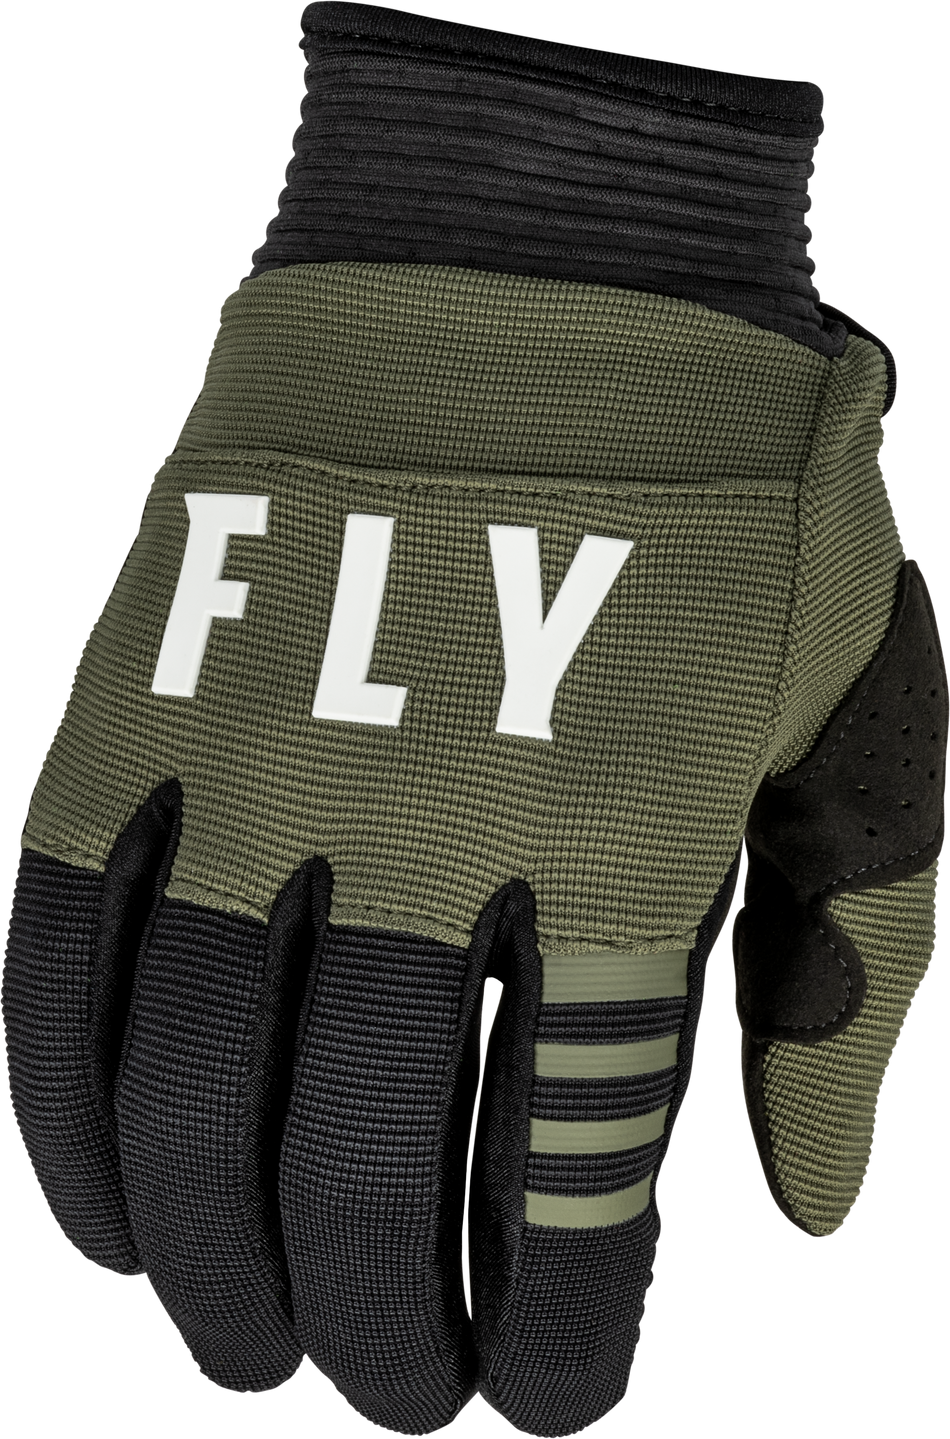 FLY RACING F-16 Gloves Olive Green/Black Xl 376-913X